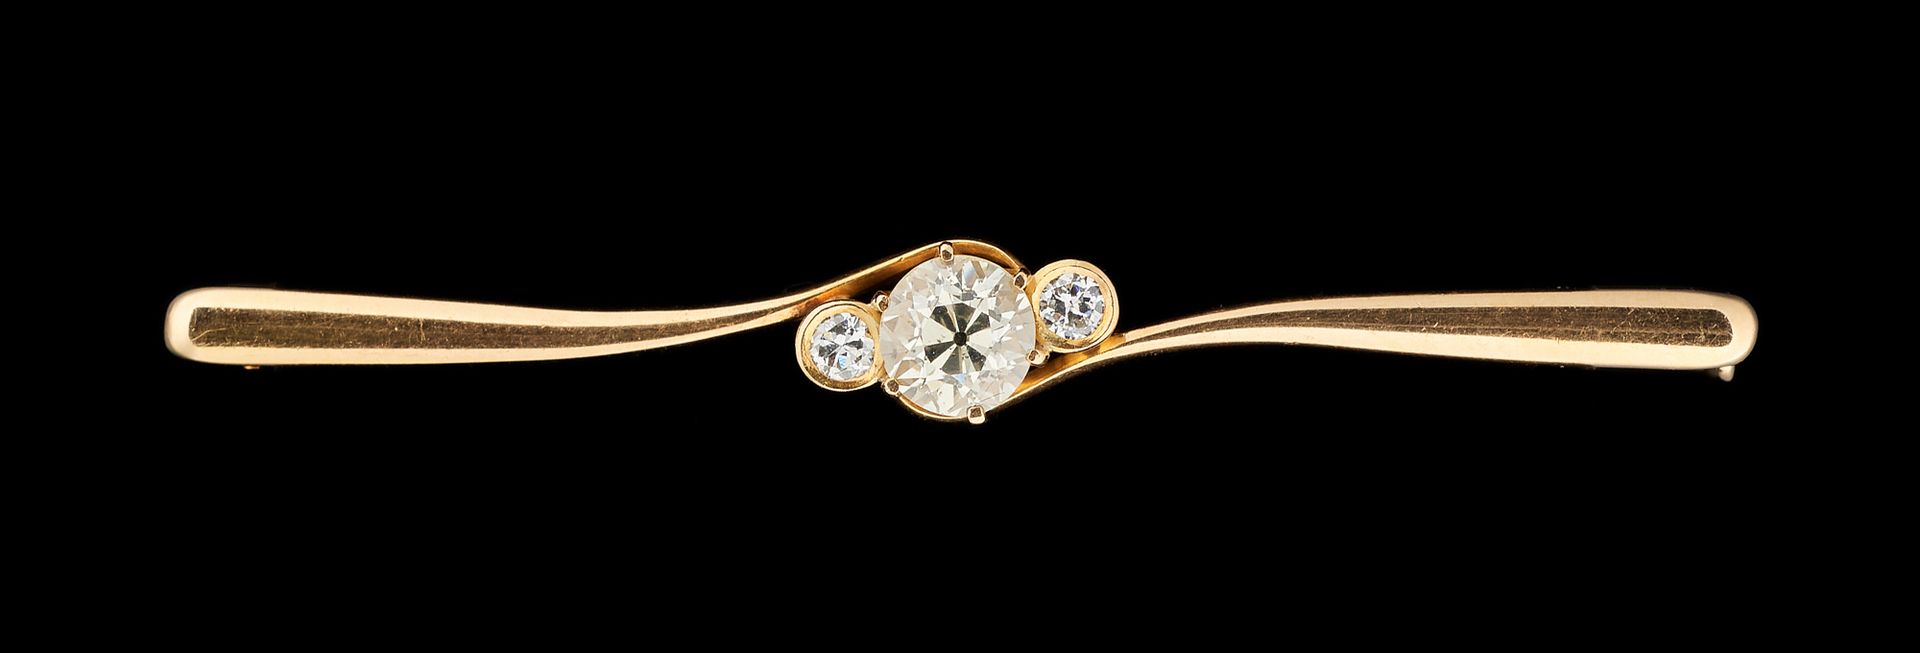 Joaillerie. Jewel: Tie pin in yellow gold with an old cut diamond "Fancy Yellow"&hellip;